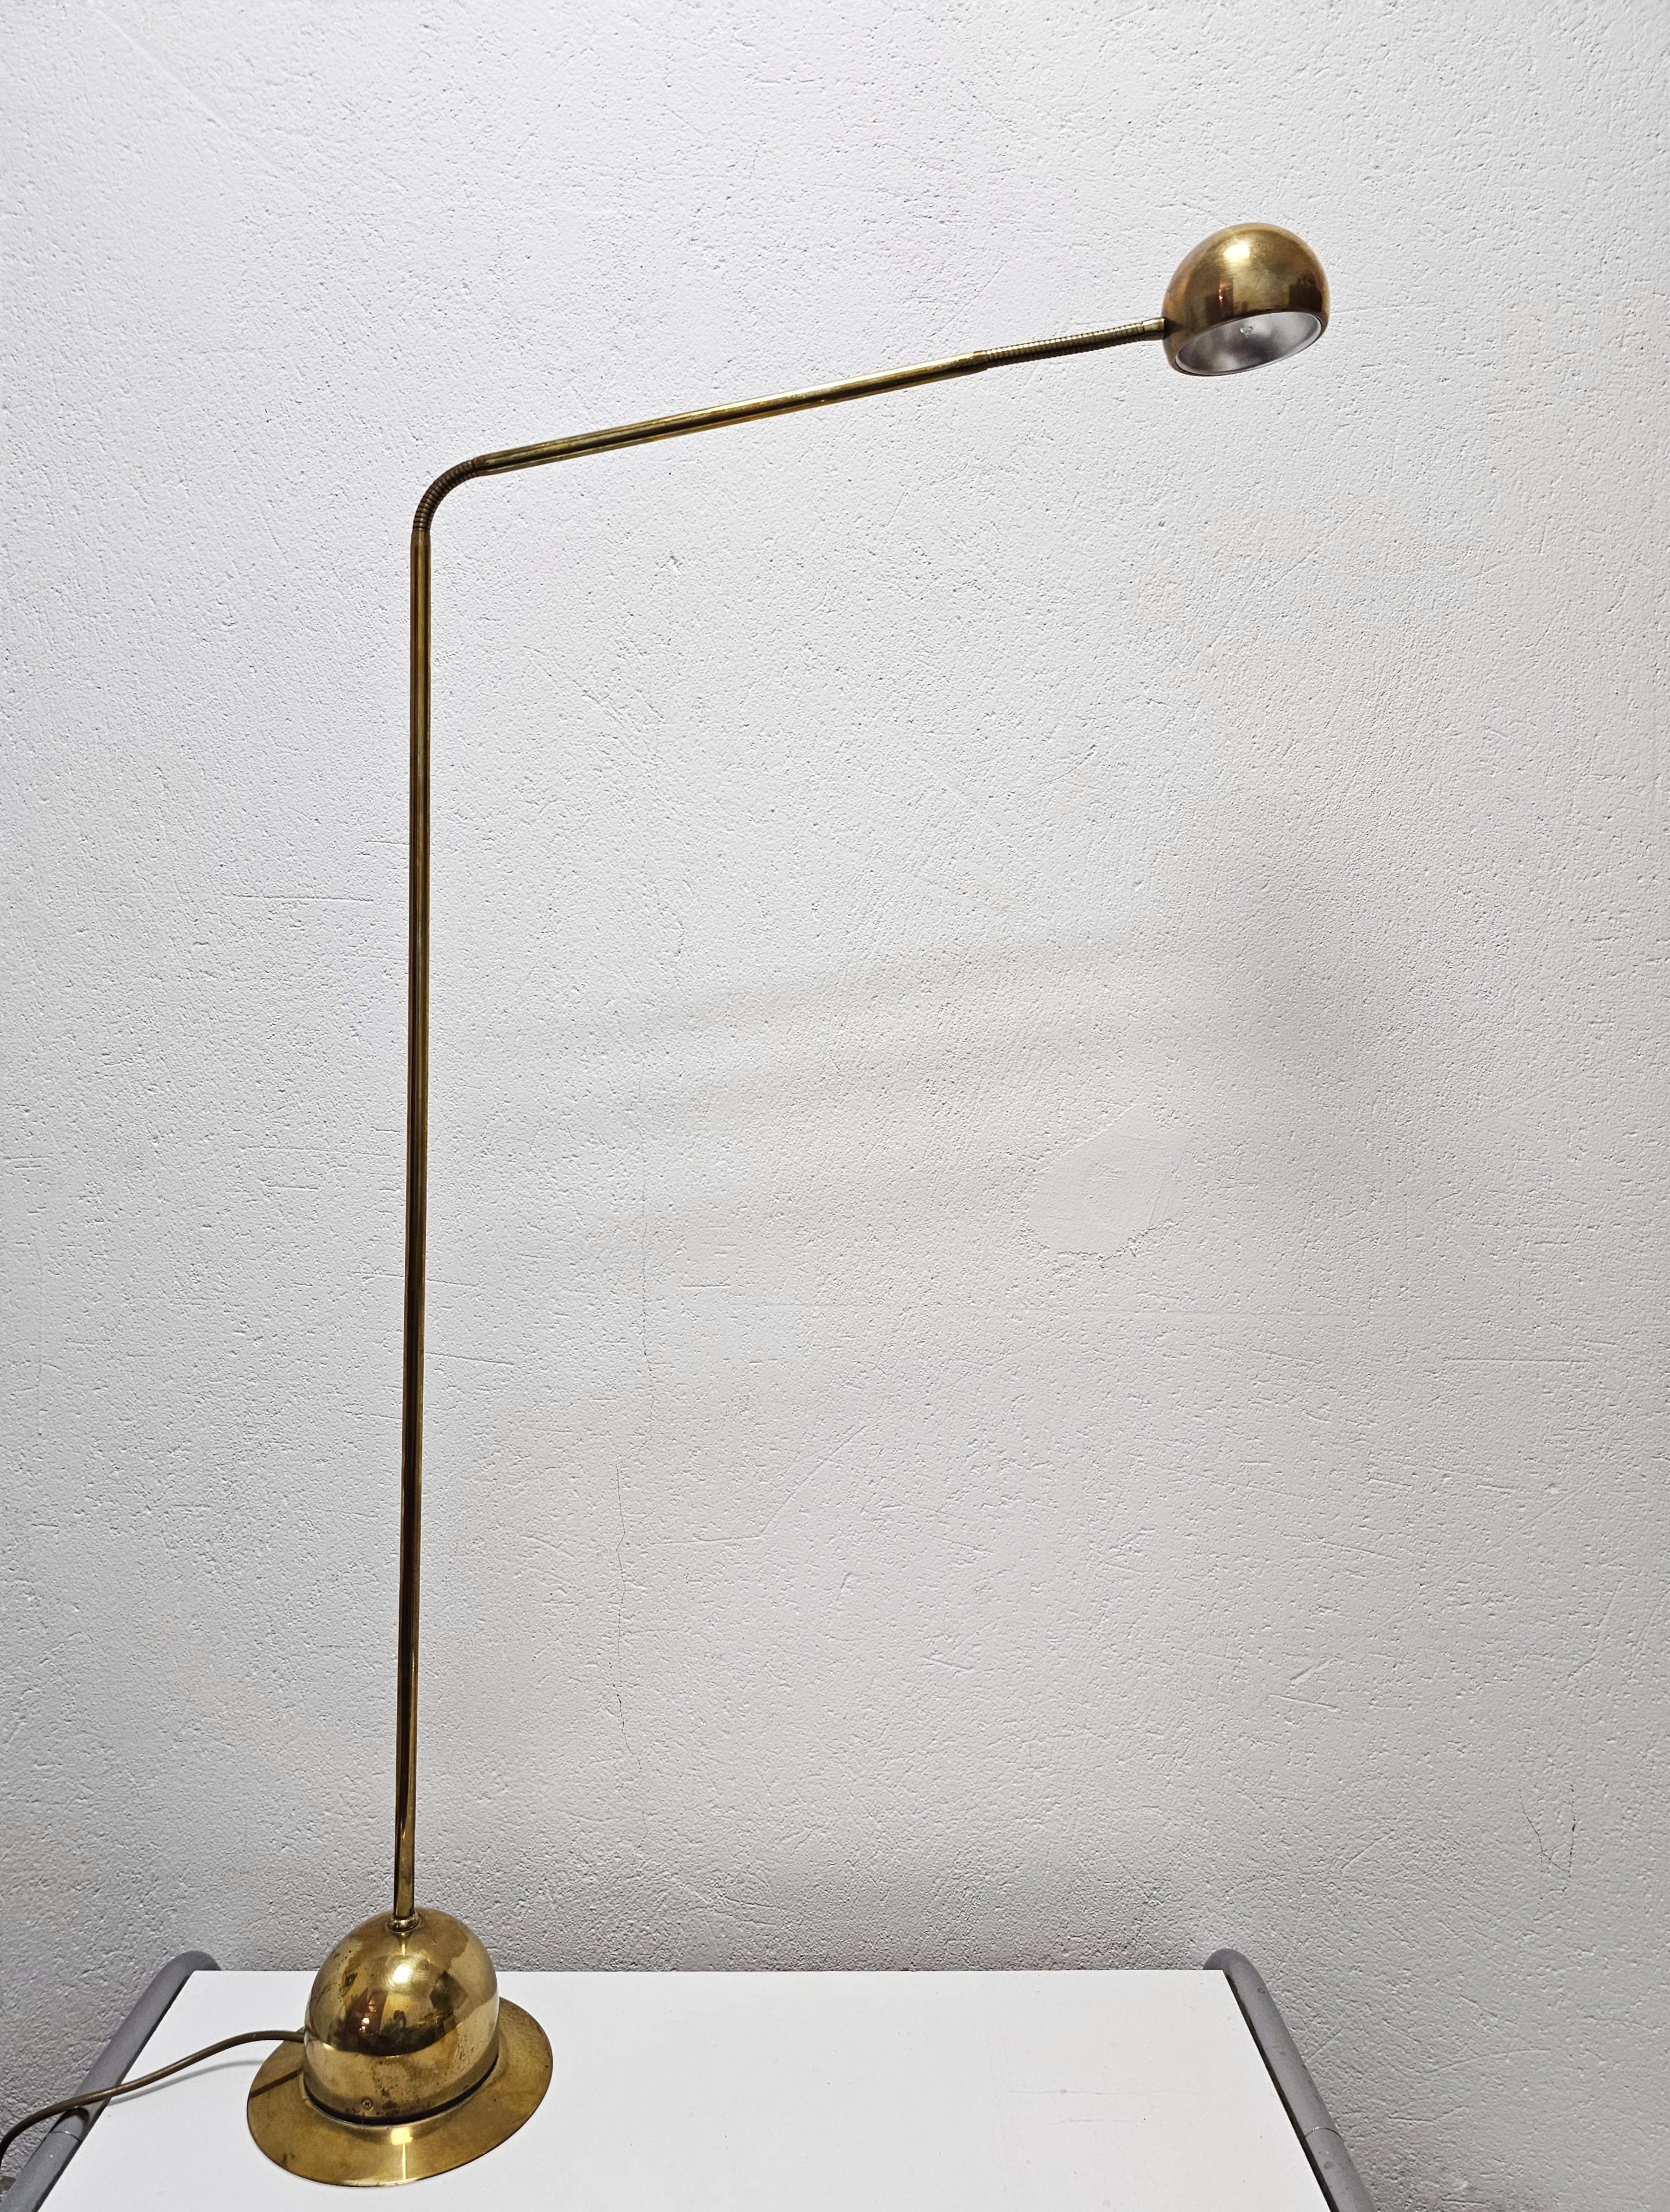 In this listing you will find an adjustable Mid Century Modern Floor Lamp. It's completely done in brass and features very elegant lines with gooseneck, that allows you to adjust the height and direction of the light. The head of the lump is also